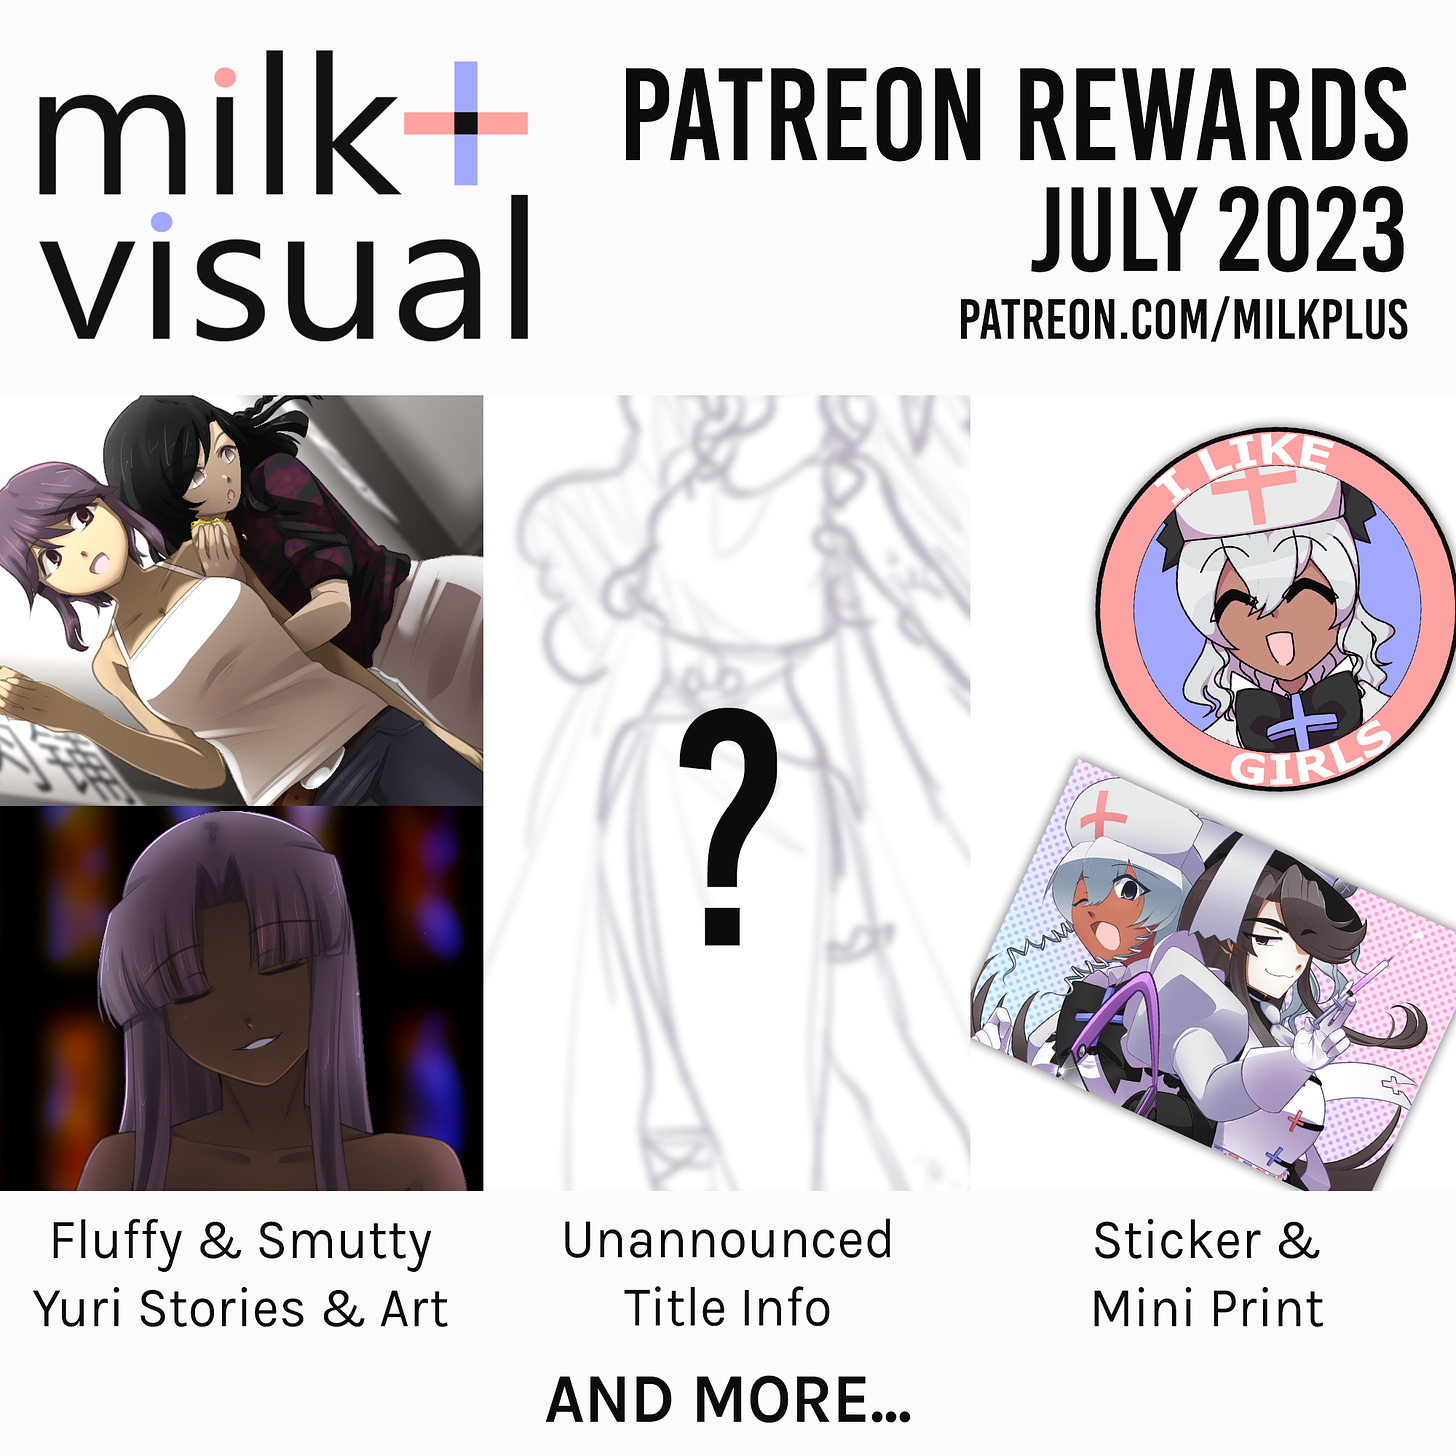 July 2023 Patreon Rewards preview for milk+ visual. There's two stories, one fluffy and smutty, featuring characters from Three Lilies and Soundless. There's unannounced title info with a blurred screencap of character concept art. There's a sticker and a mini print, one with a mascot smiling with the words I like girls in a circle around her, the other the two mascots posing together. And there's more at patreon.com/milkplus.